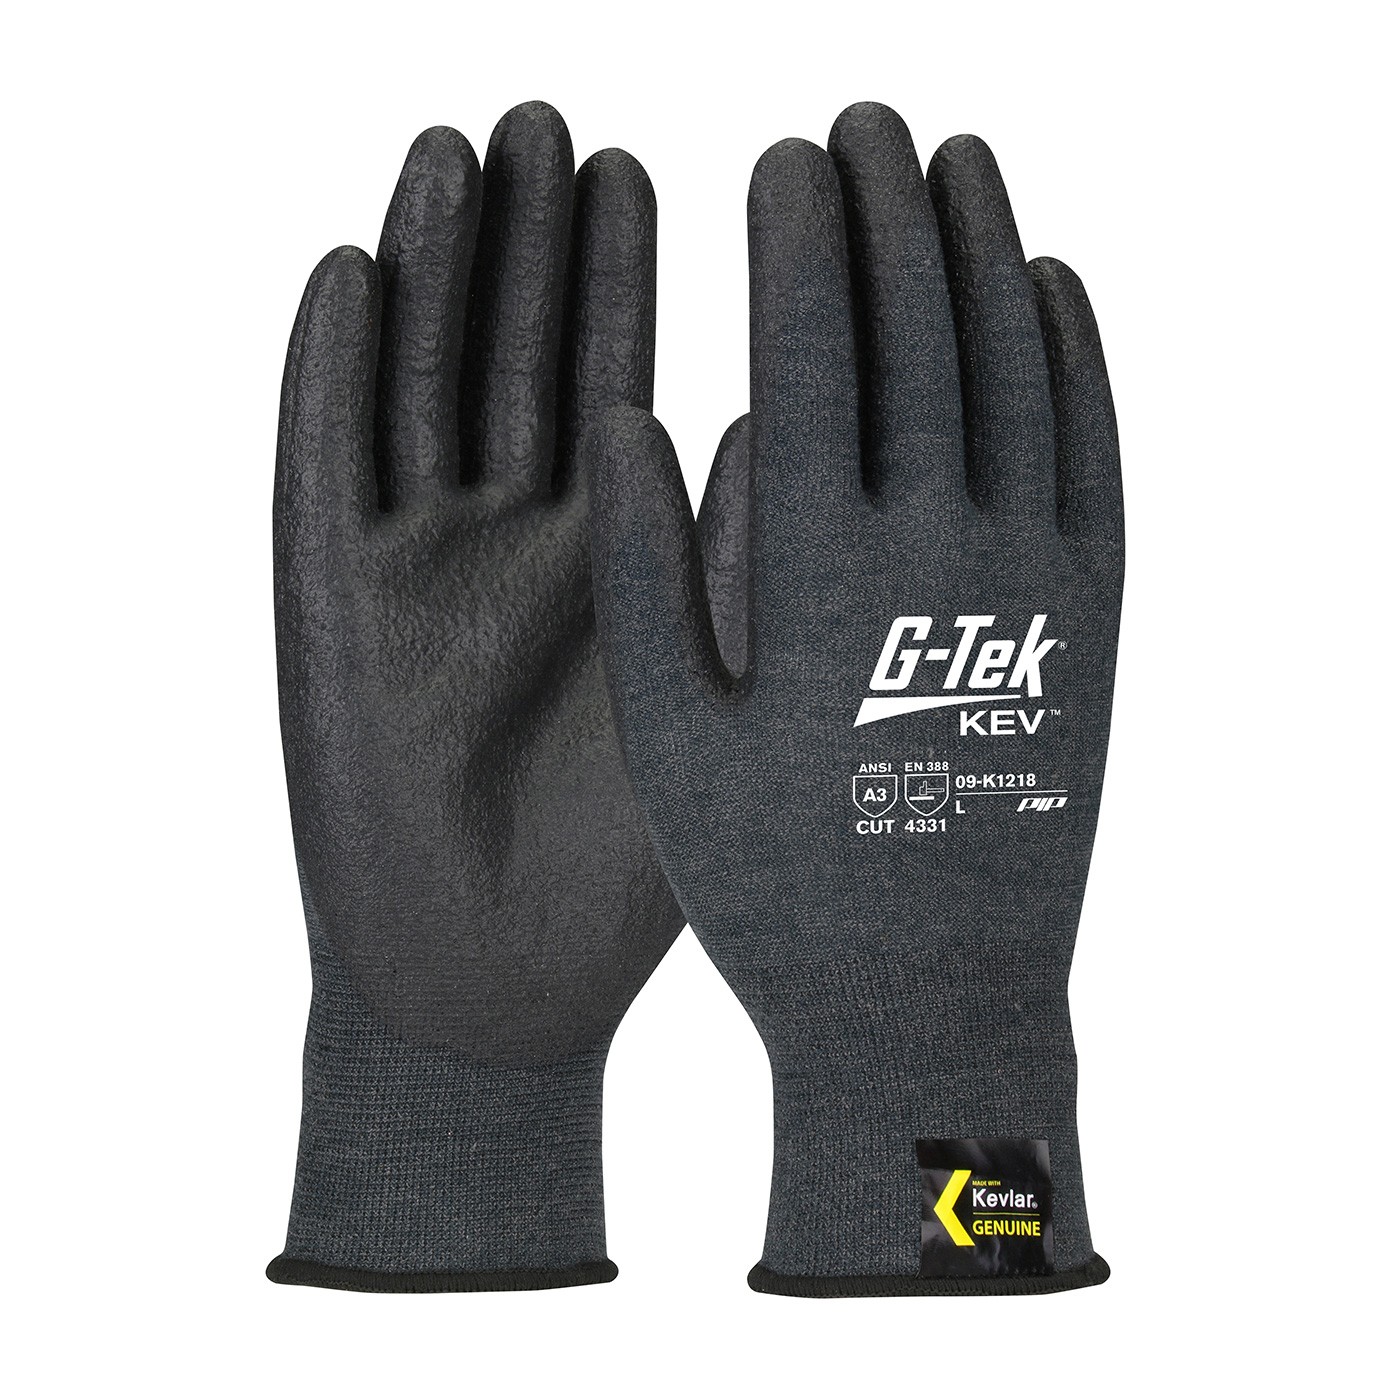 G-Tek® KEV™ Seamless Knit Kevlar® Blended Glove with NeoFoam® Coated Palm & Fingers - Touchscreen Compatible  (#09-K1218)